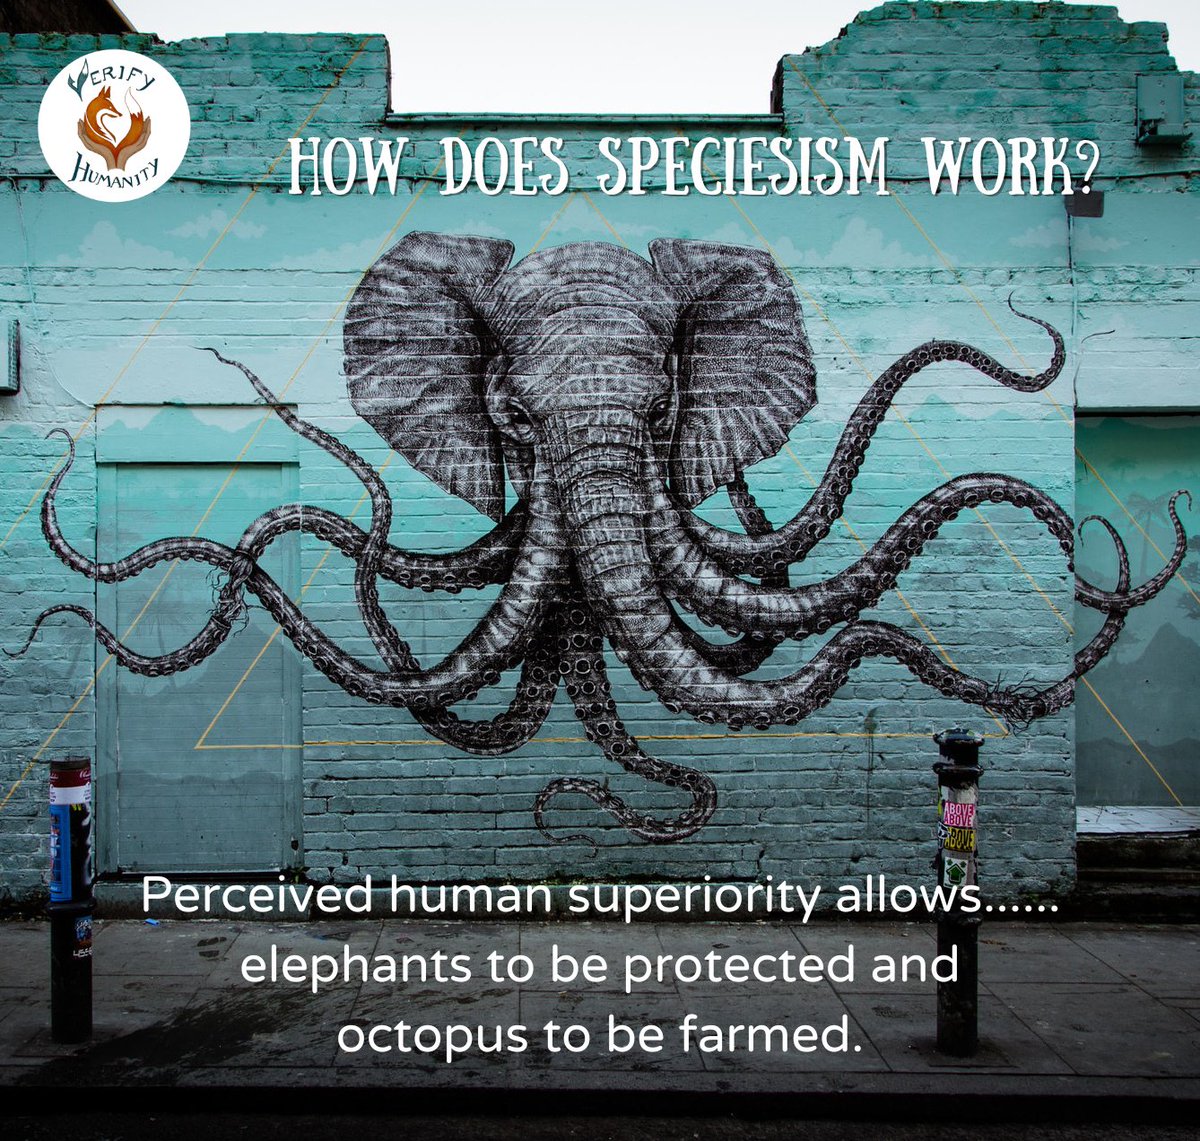 🐙 Are you a speciesist? 🐙                     

Have you become a casualty of #speciesism? Read our article to see why #octopus are amazing. 
Sign this #petition to protect octopus. 

Sources
Photo by Paolo Bendandi from Unsplash